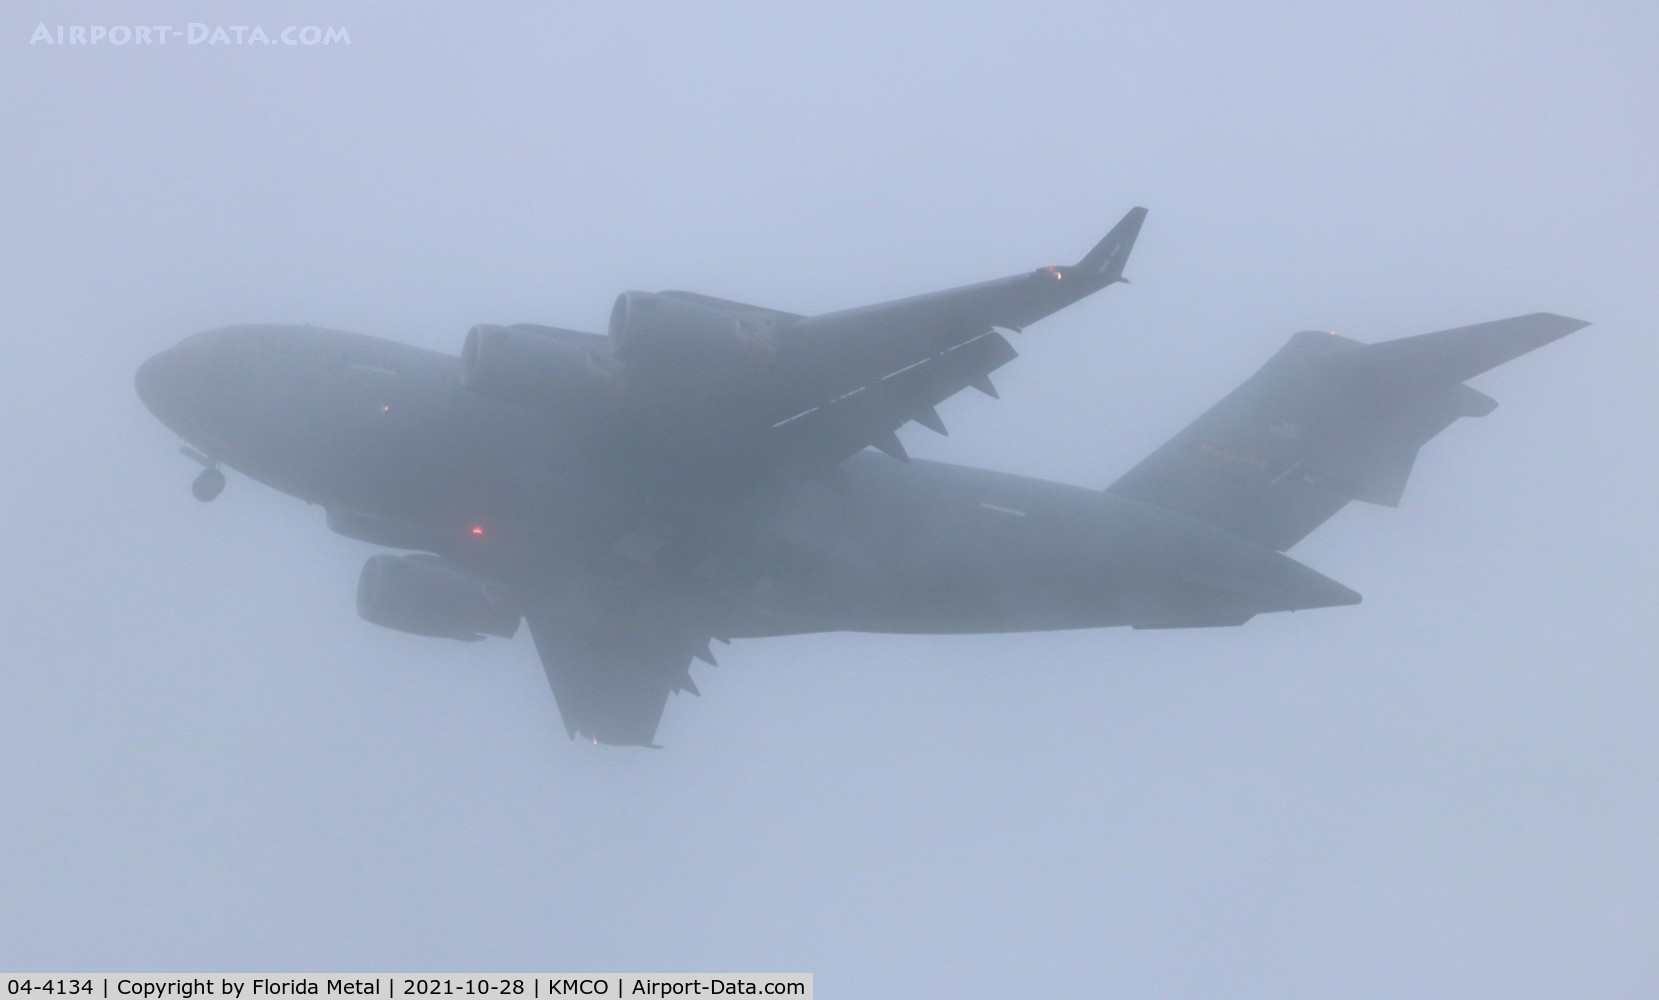 04-4134, 2004 Boeing C-17A Globemaster III C/N P-134, USAF C-17A zx under IFR conditions